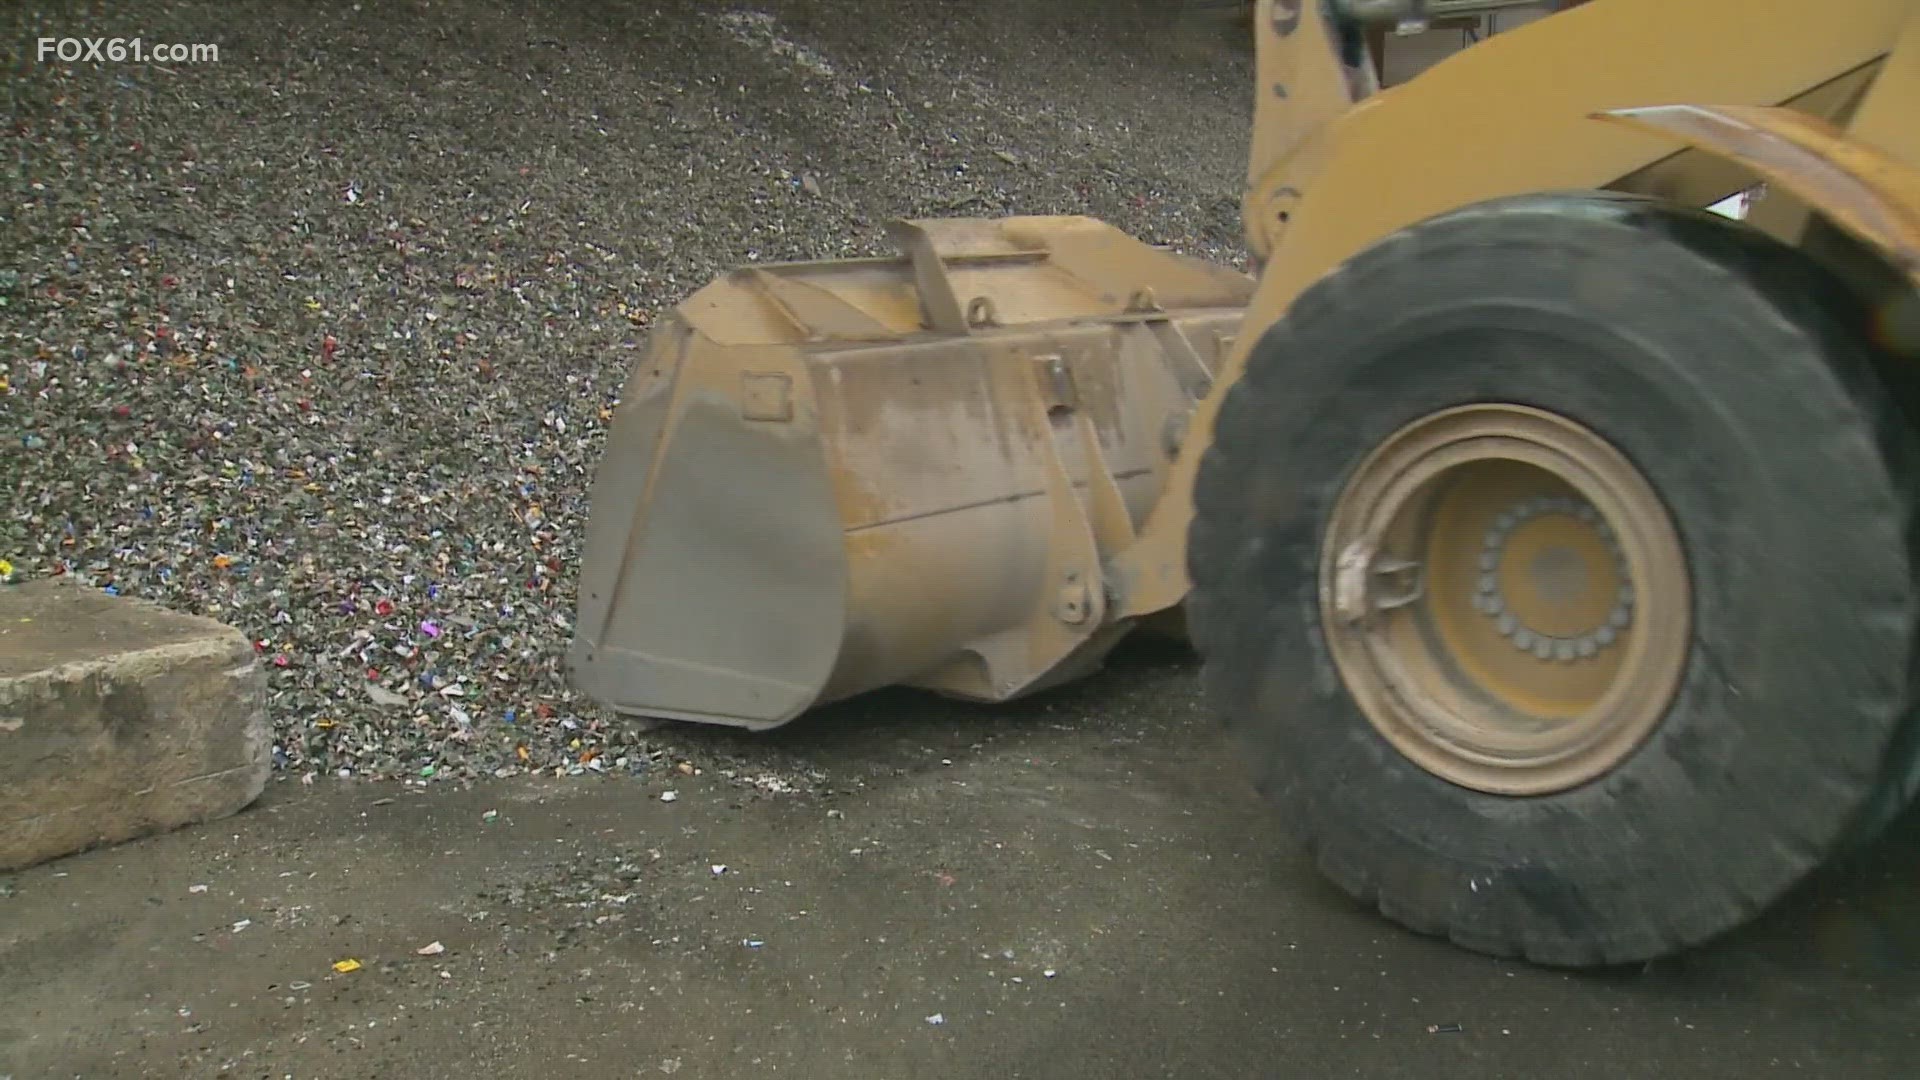 FOX61's Jim Altman shares an inside look at the Urban Mining CT facility, which uses a earth-friendly process called "Bottles to Buildings" to make concrete.